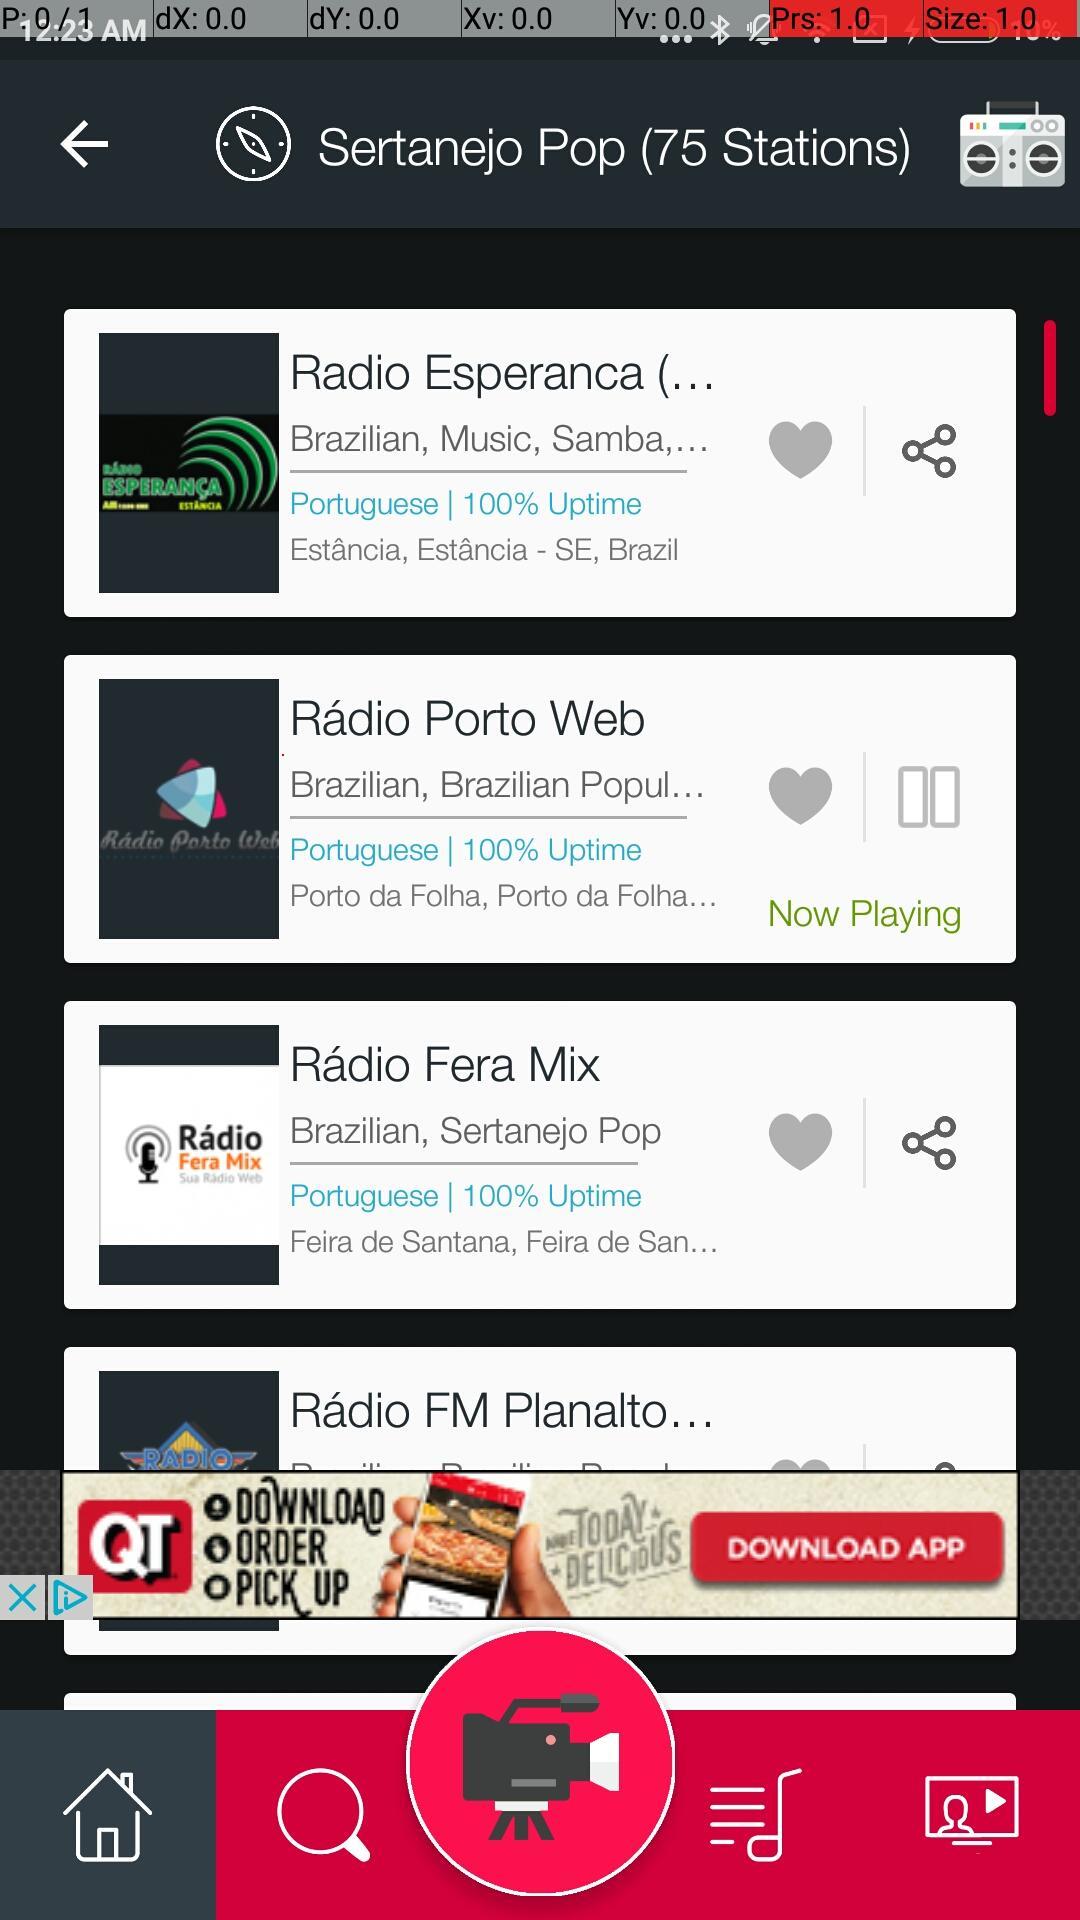 Sertanejo Music Videos & Radio for Android - APK Download